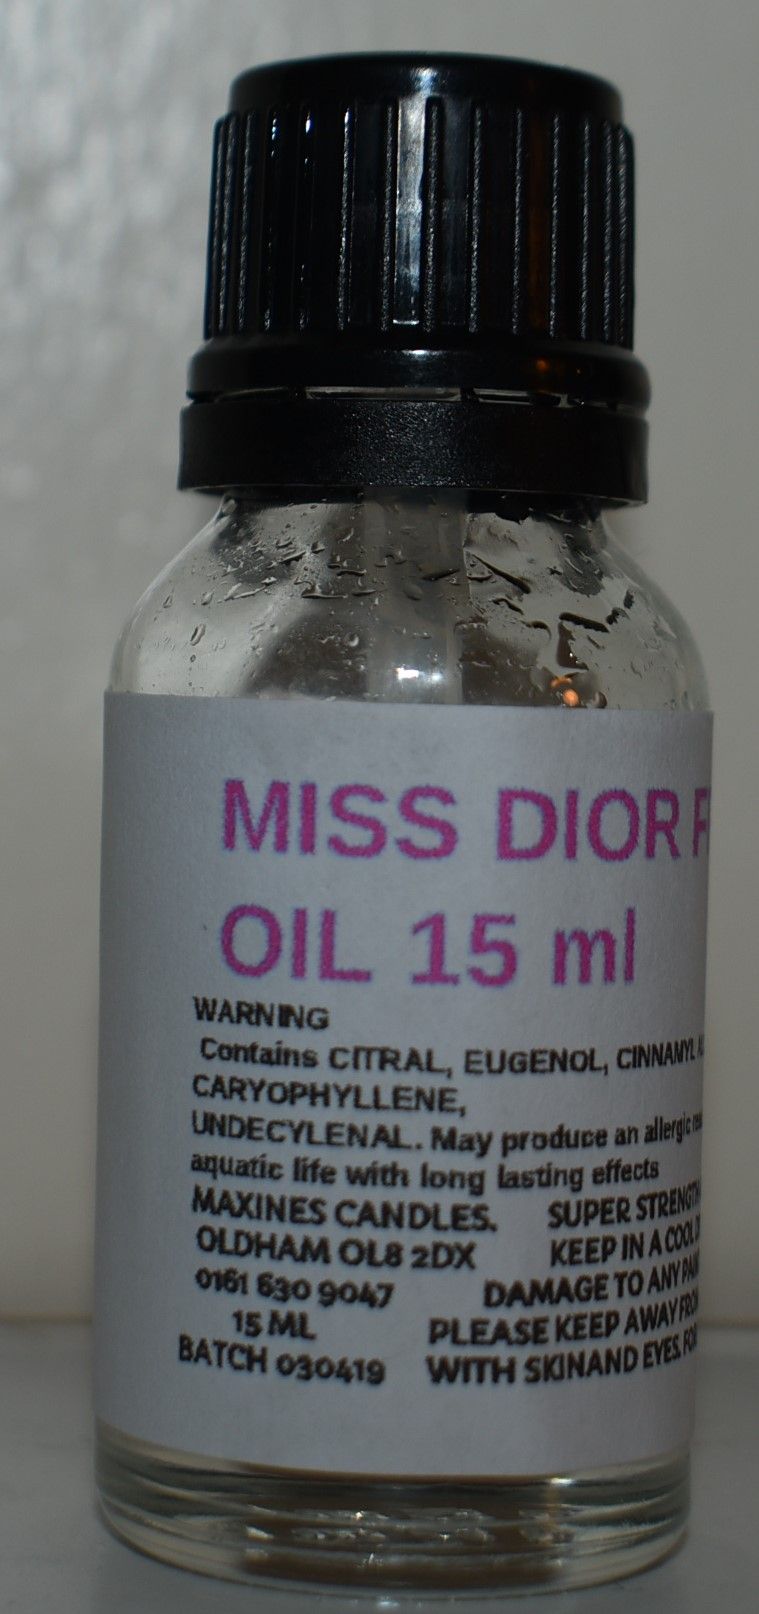 SIMILAR TO MISS DIOR DIFFUSER OIL